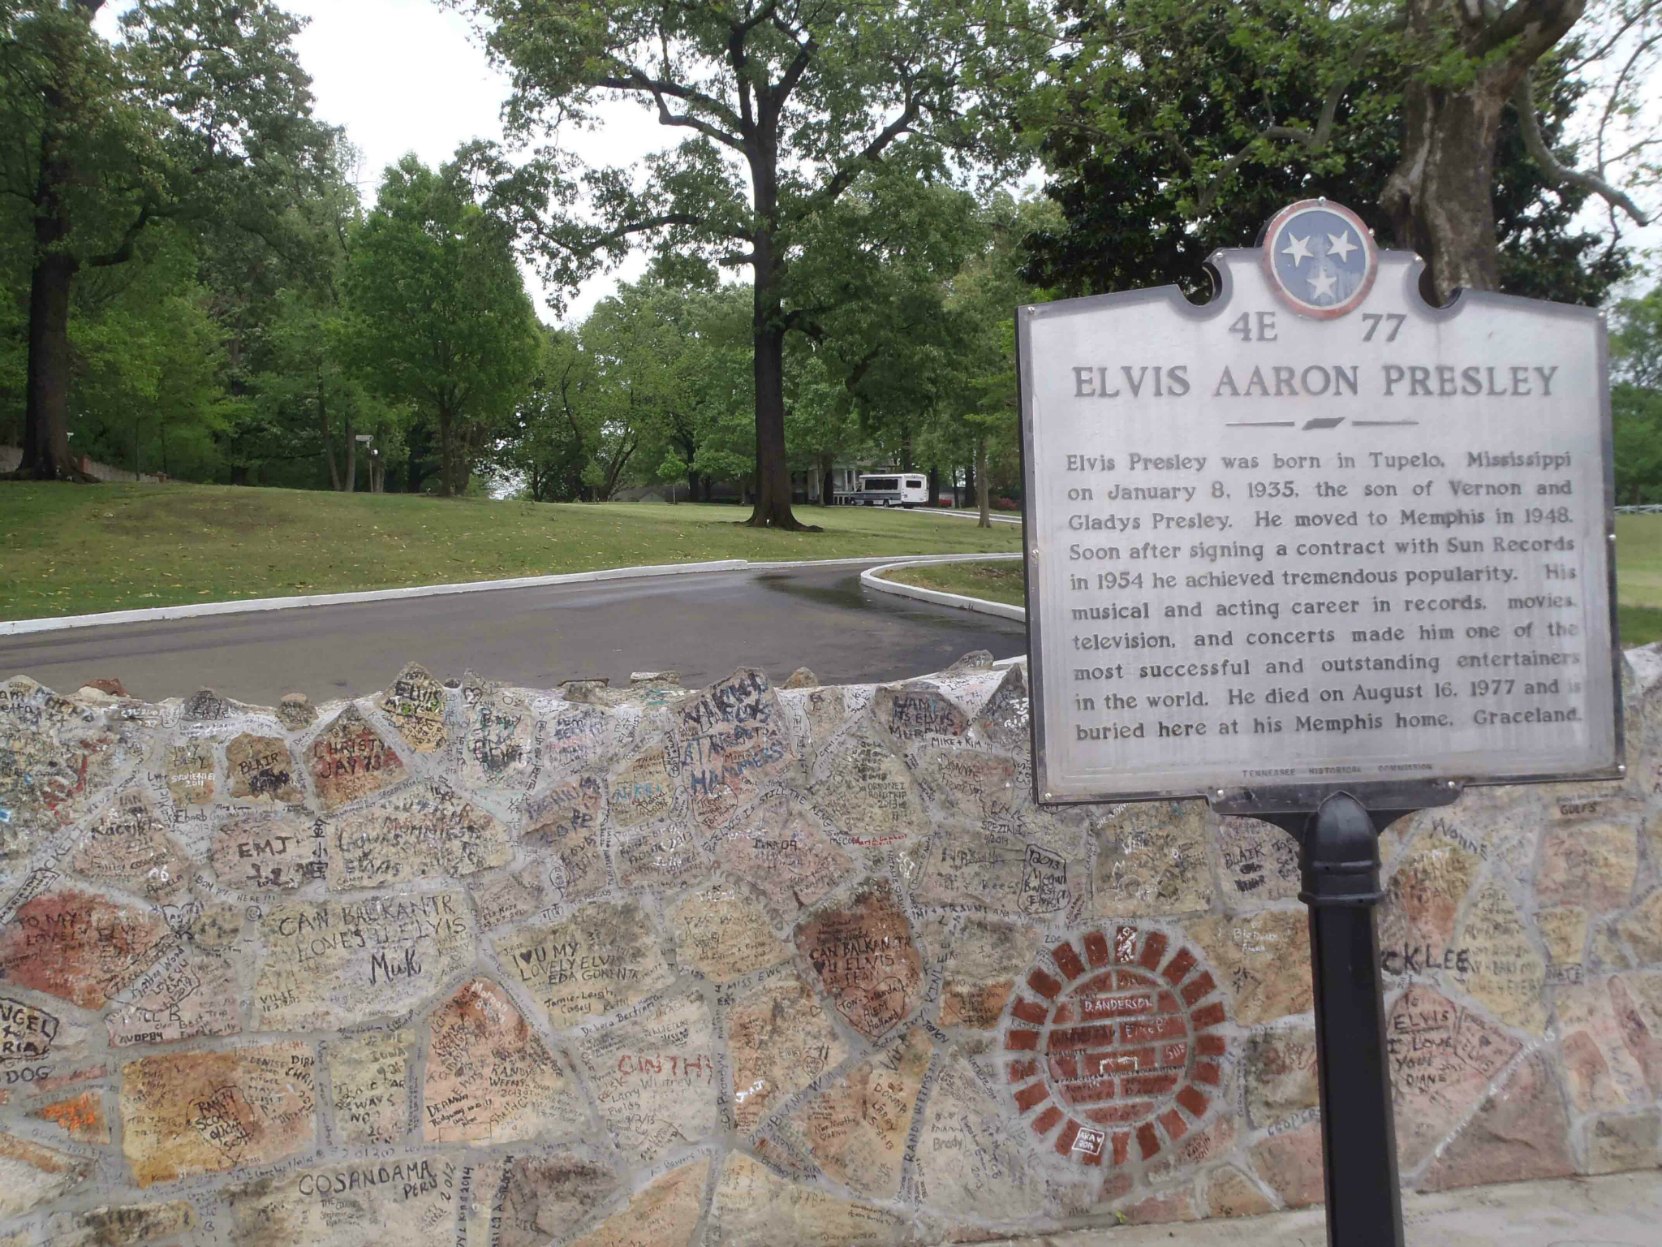 Tennessee Historical Commission marker commemorating Elvis Aaron Presley, outside Graceland, Memphis, Tennessee